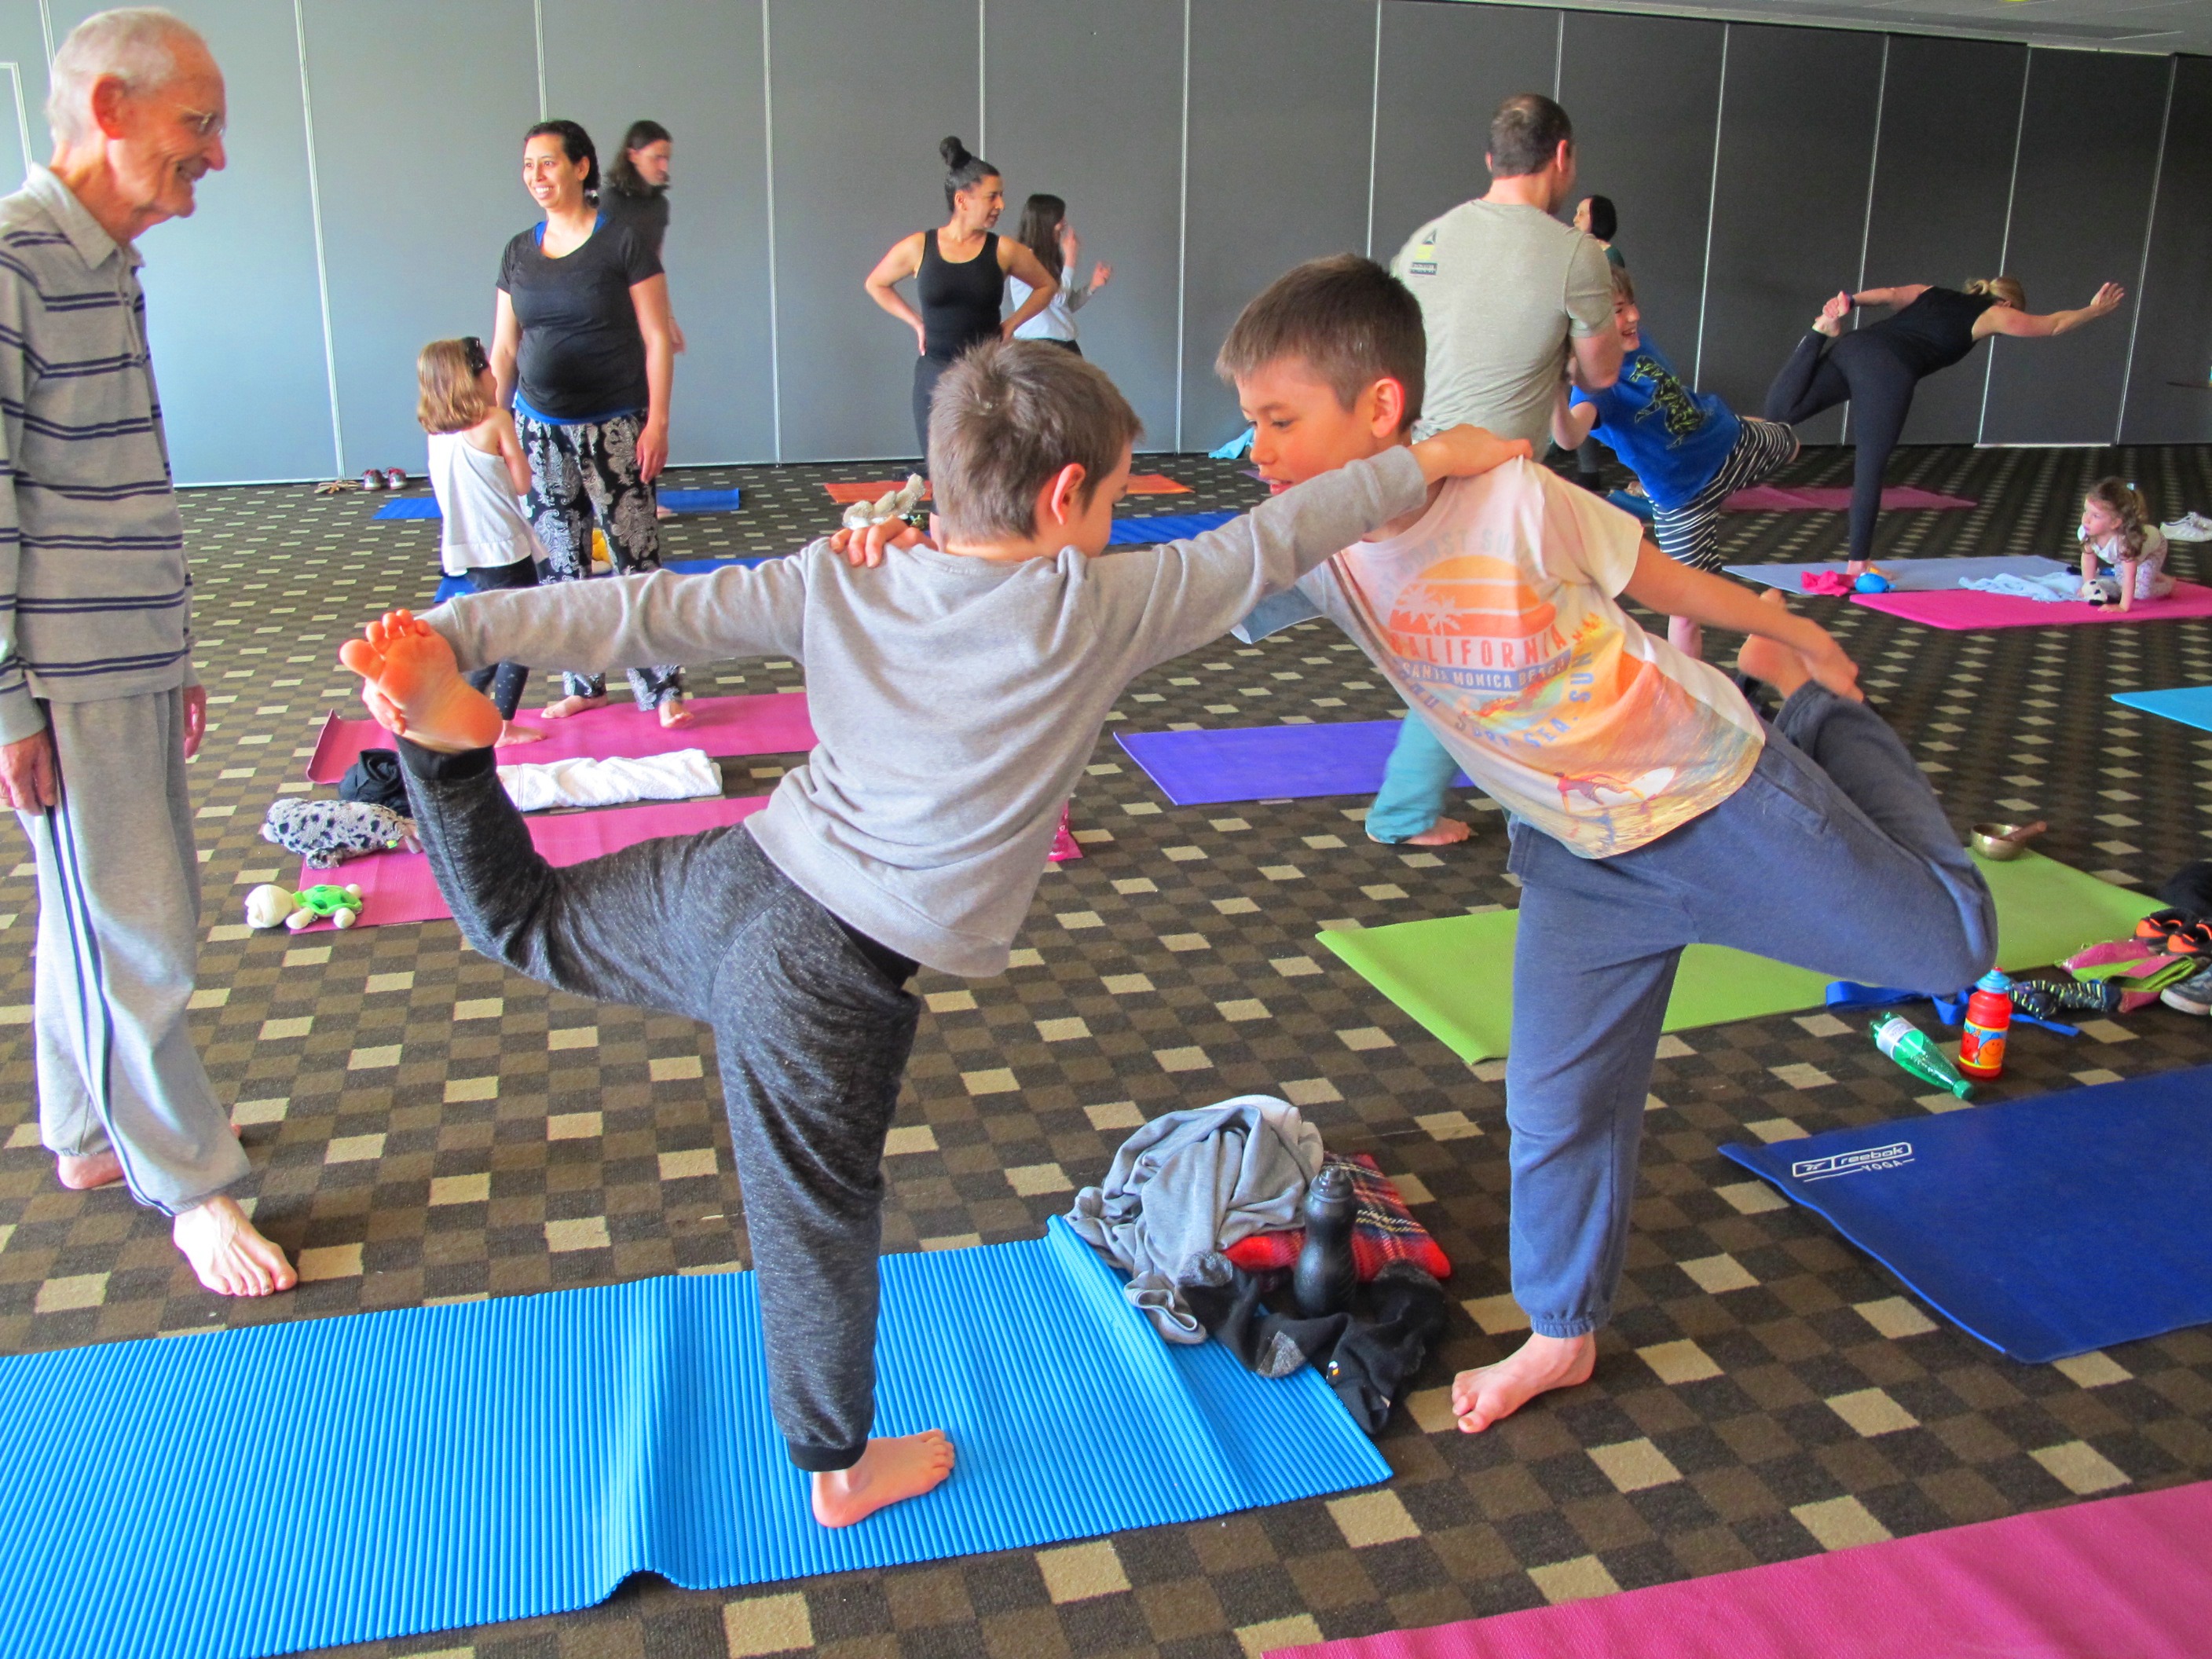 Two boys hold a yoga pose